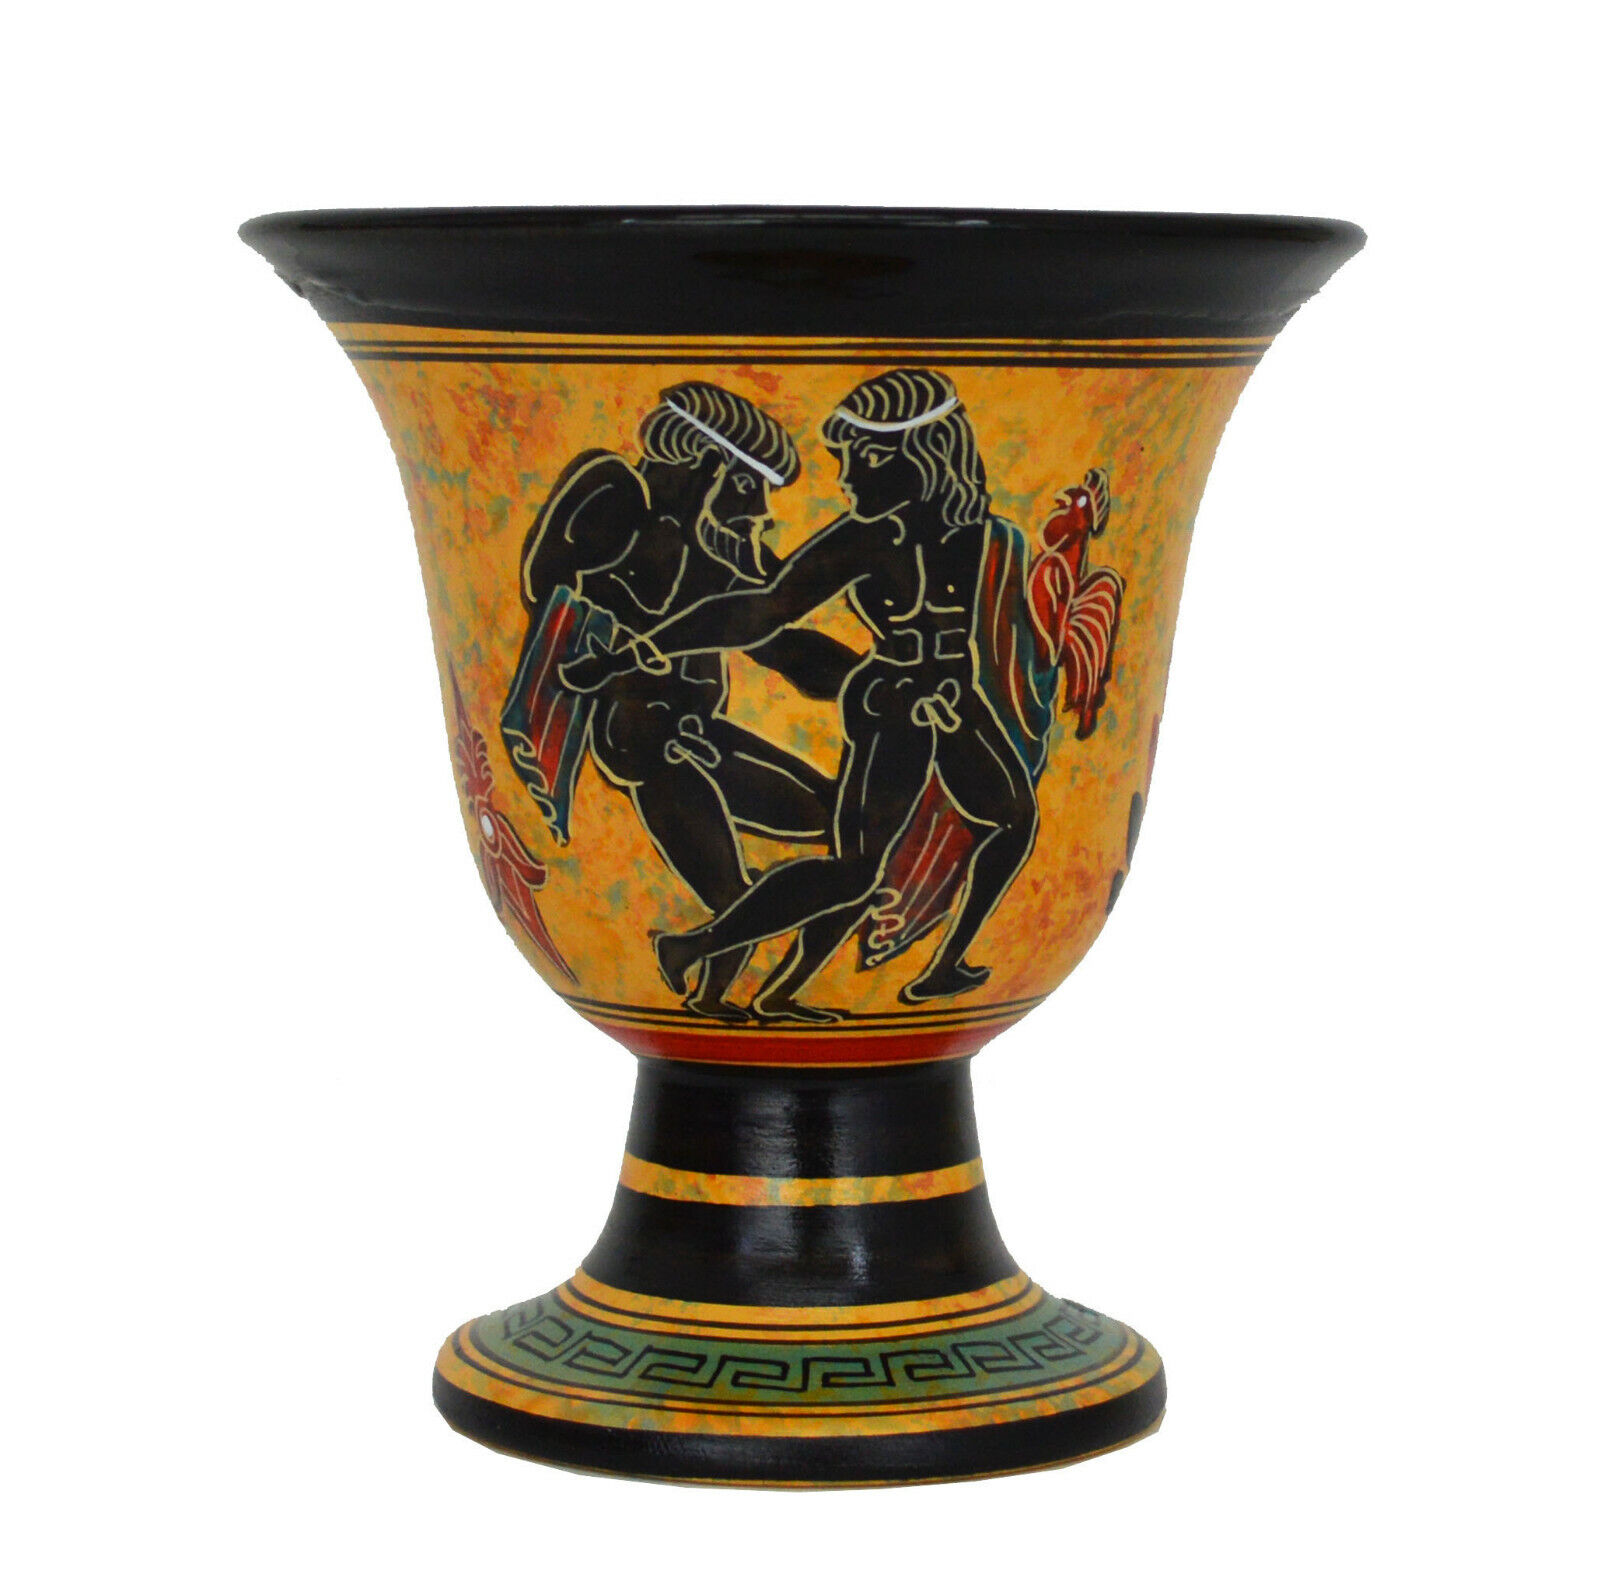 Pythagoras Fair Cup with Ganymedes the Cupbearer and Zeus in Greek Mythology